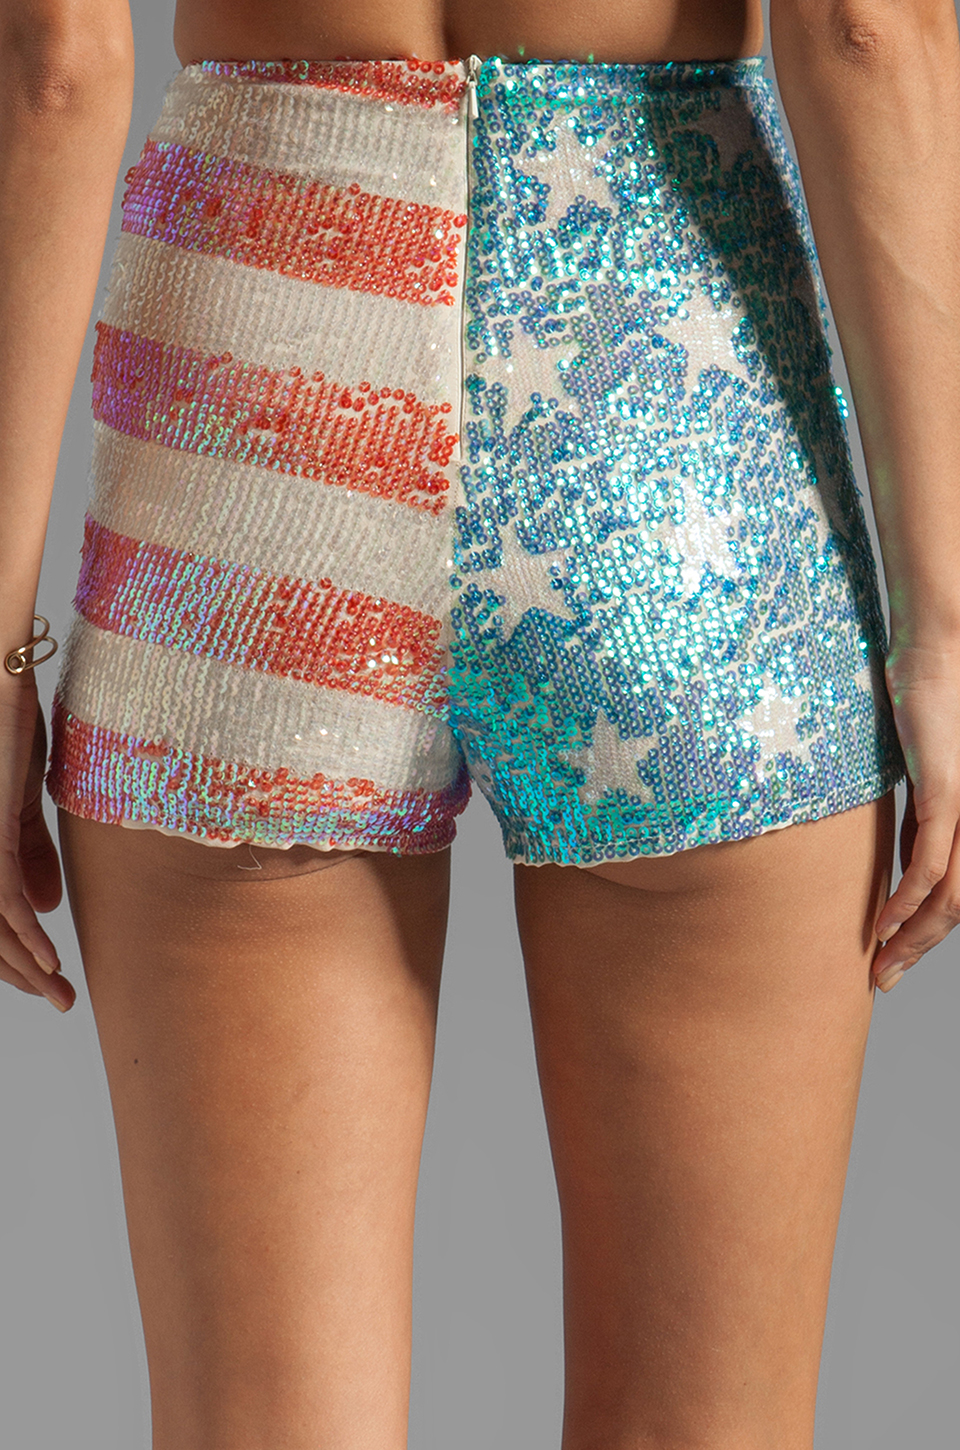 Lyst - Wildfox White Label American Glitter Sequin Shorts in Blue in Blue